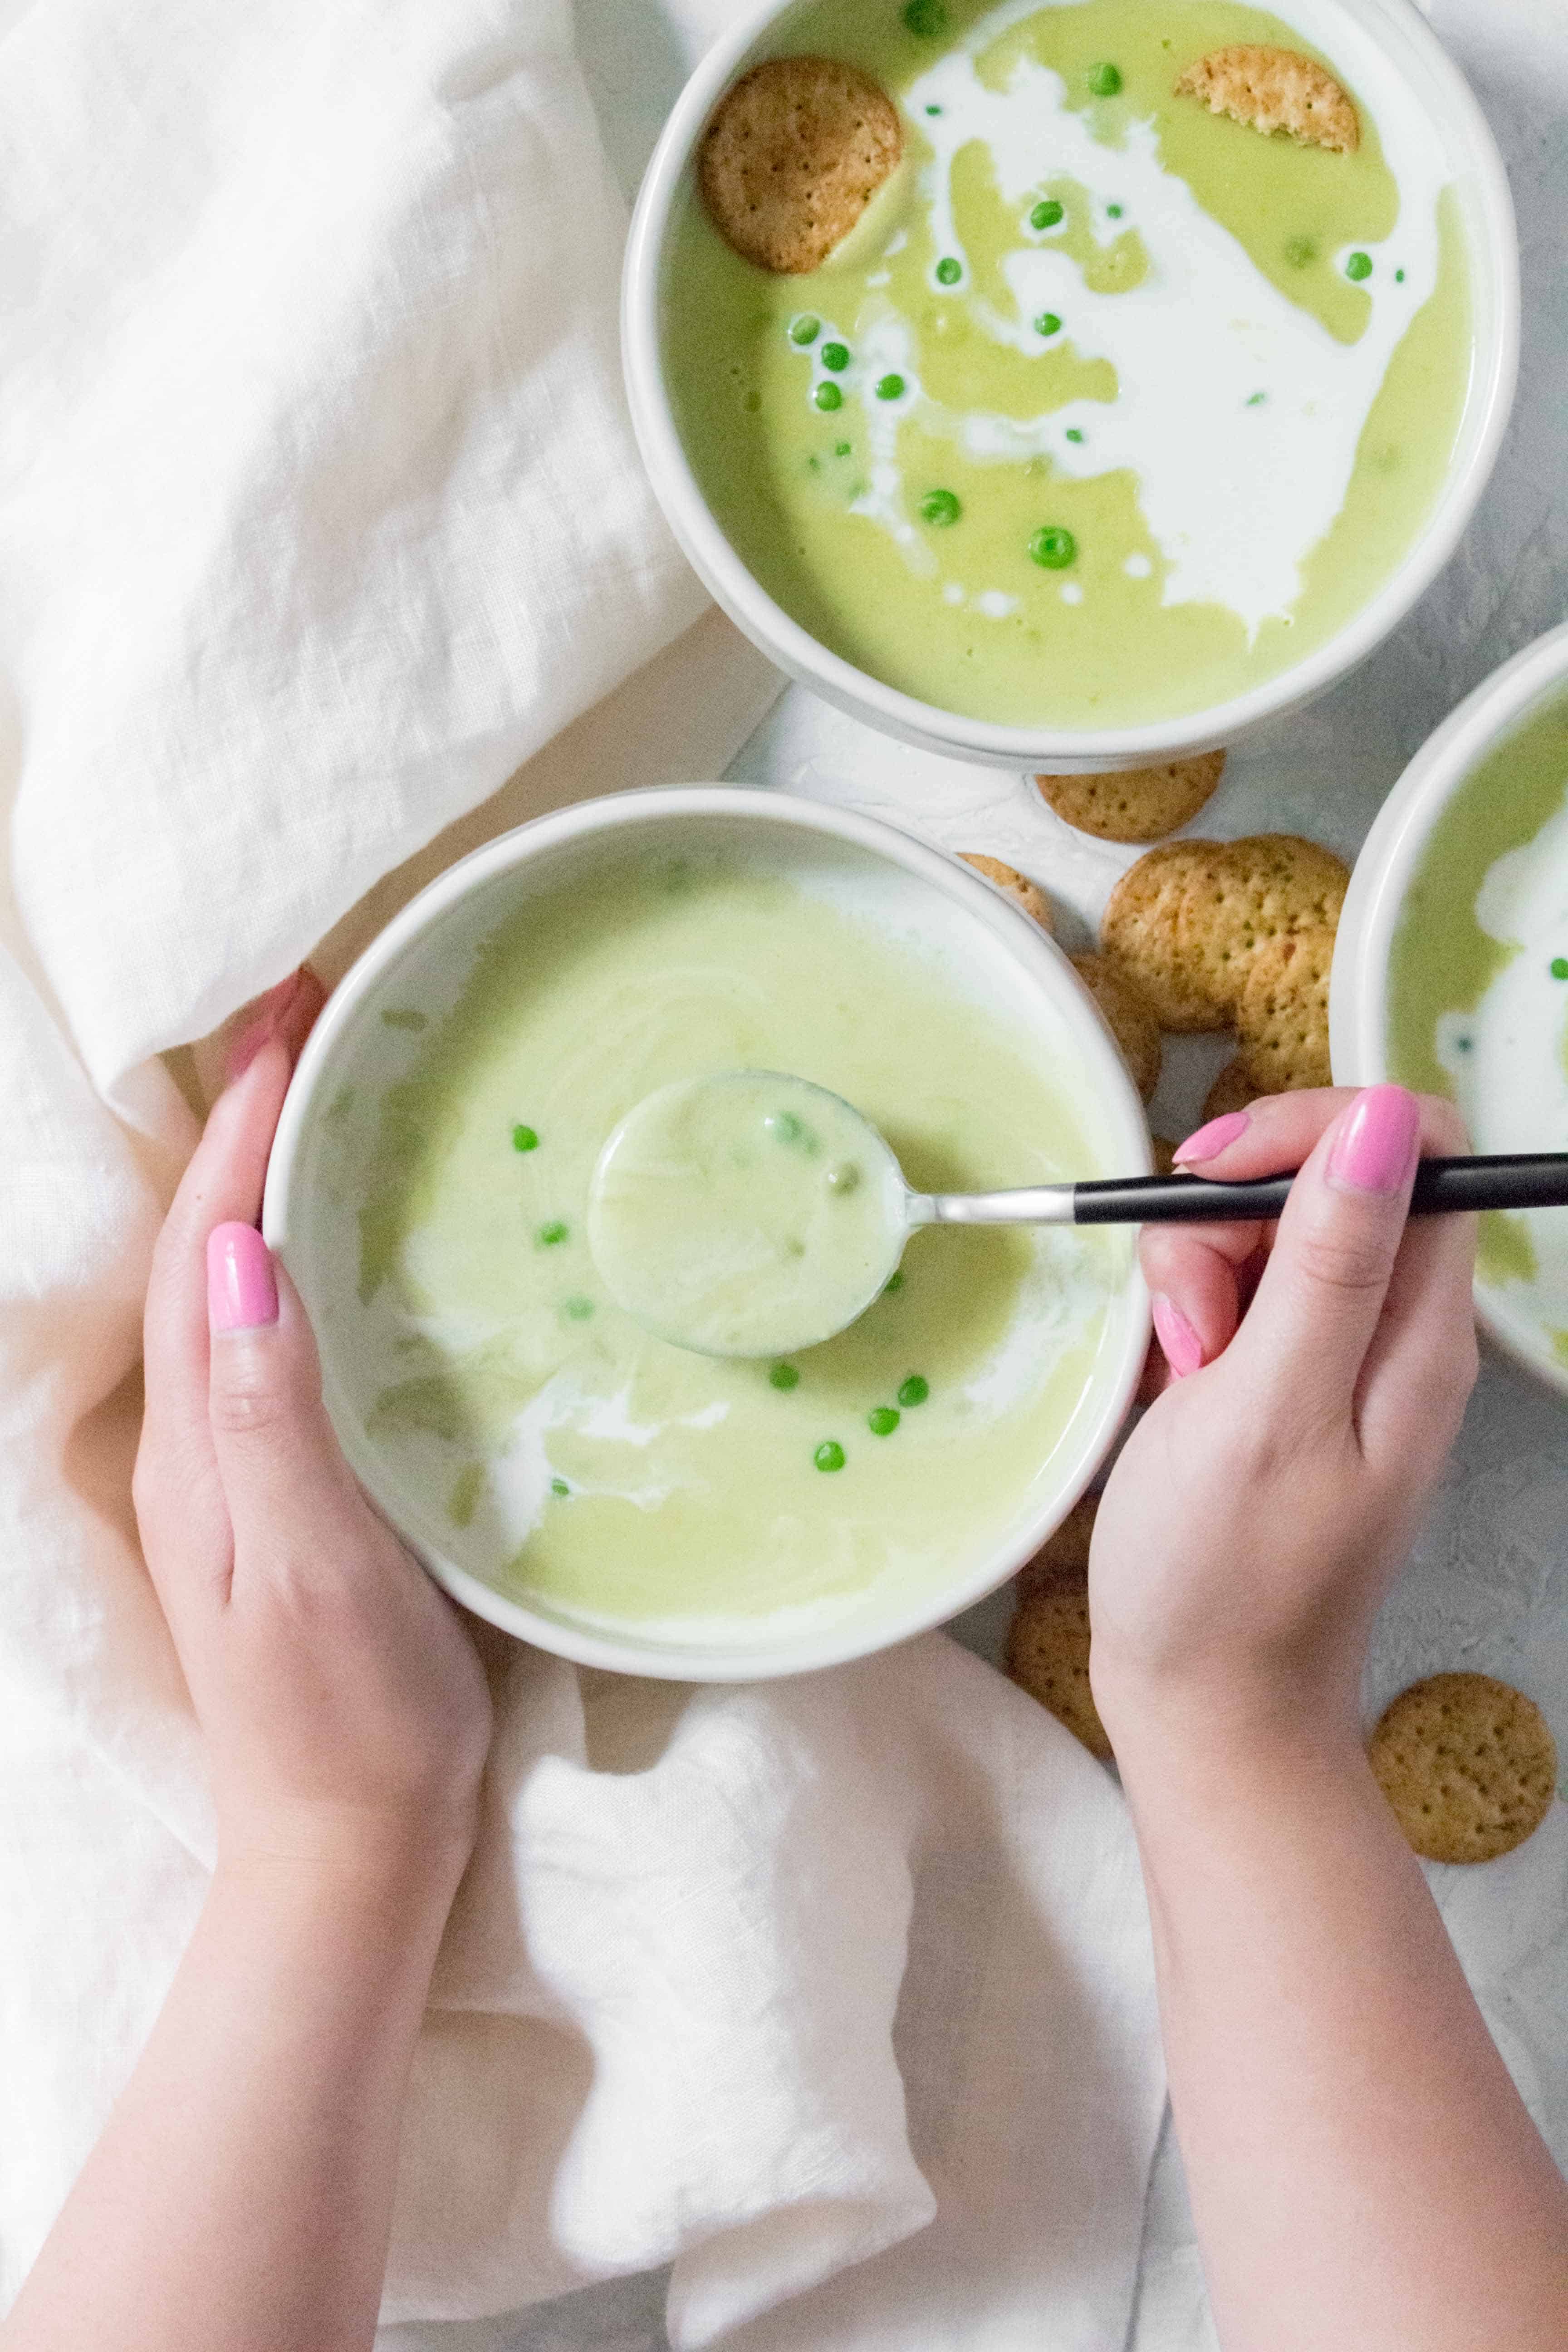 Vibrant, fresh, and delicious, this Pea Potato Soup is going to be a staple in your weekly meal plan! Easily made with your Philips SoupMaker.